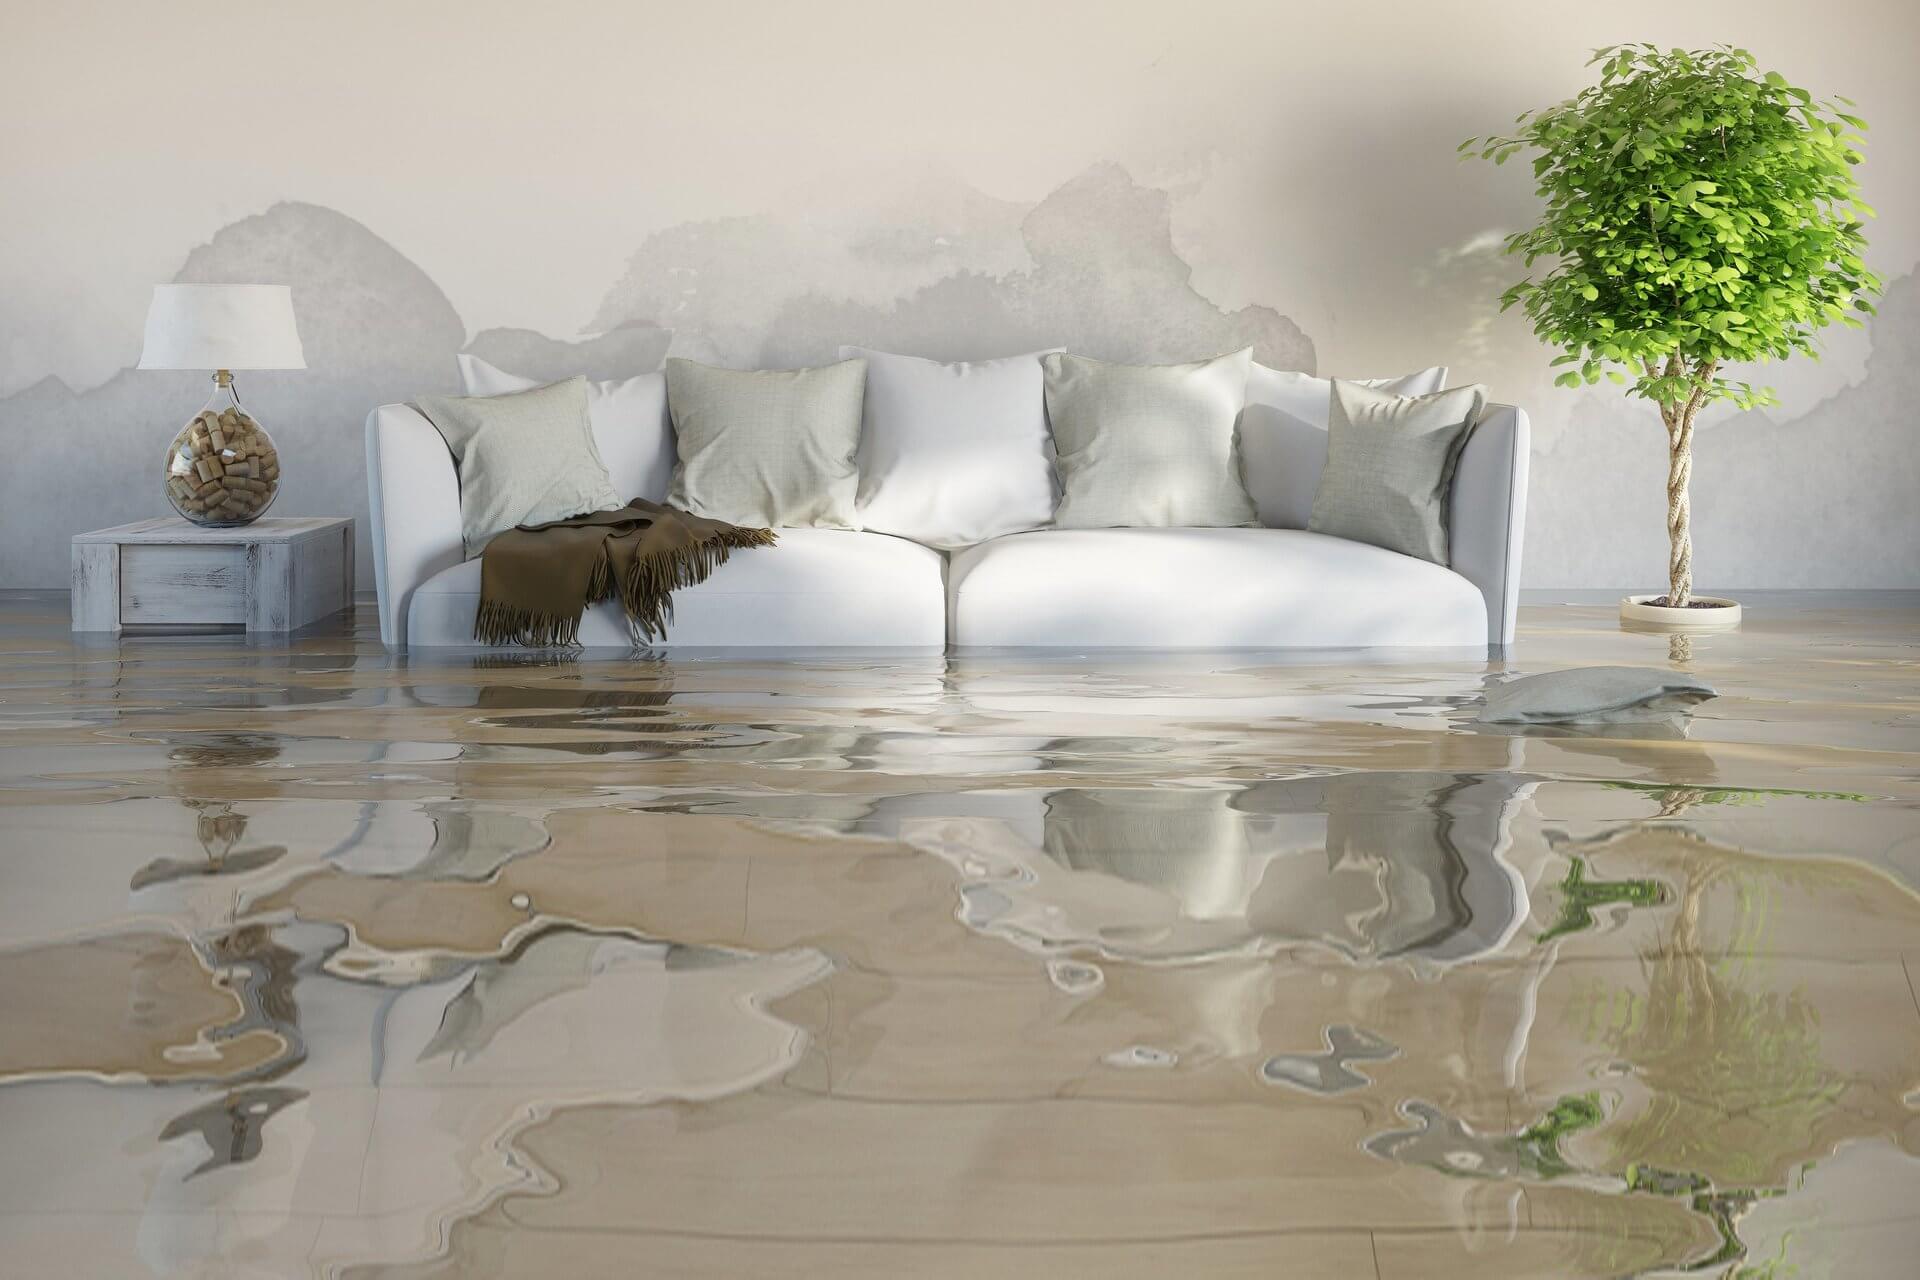 steps to deal with water damage